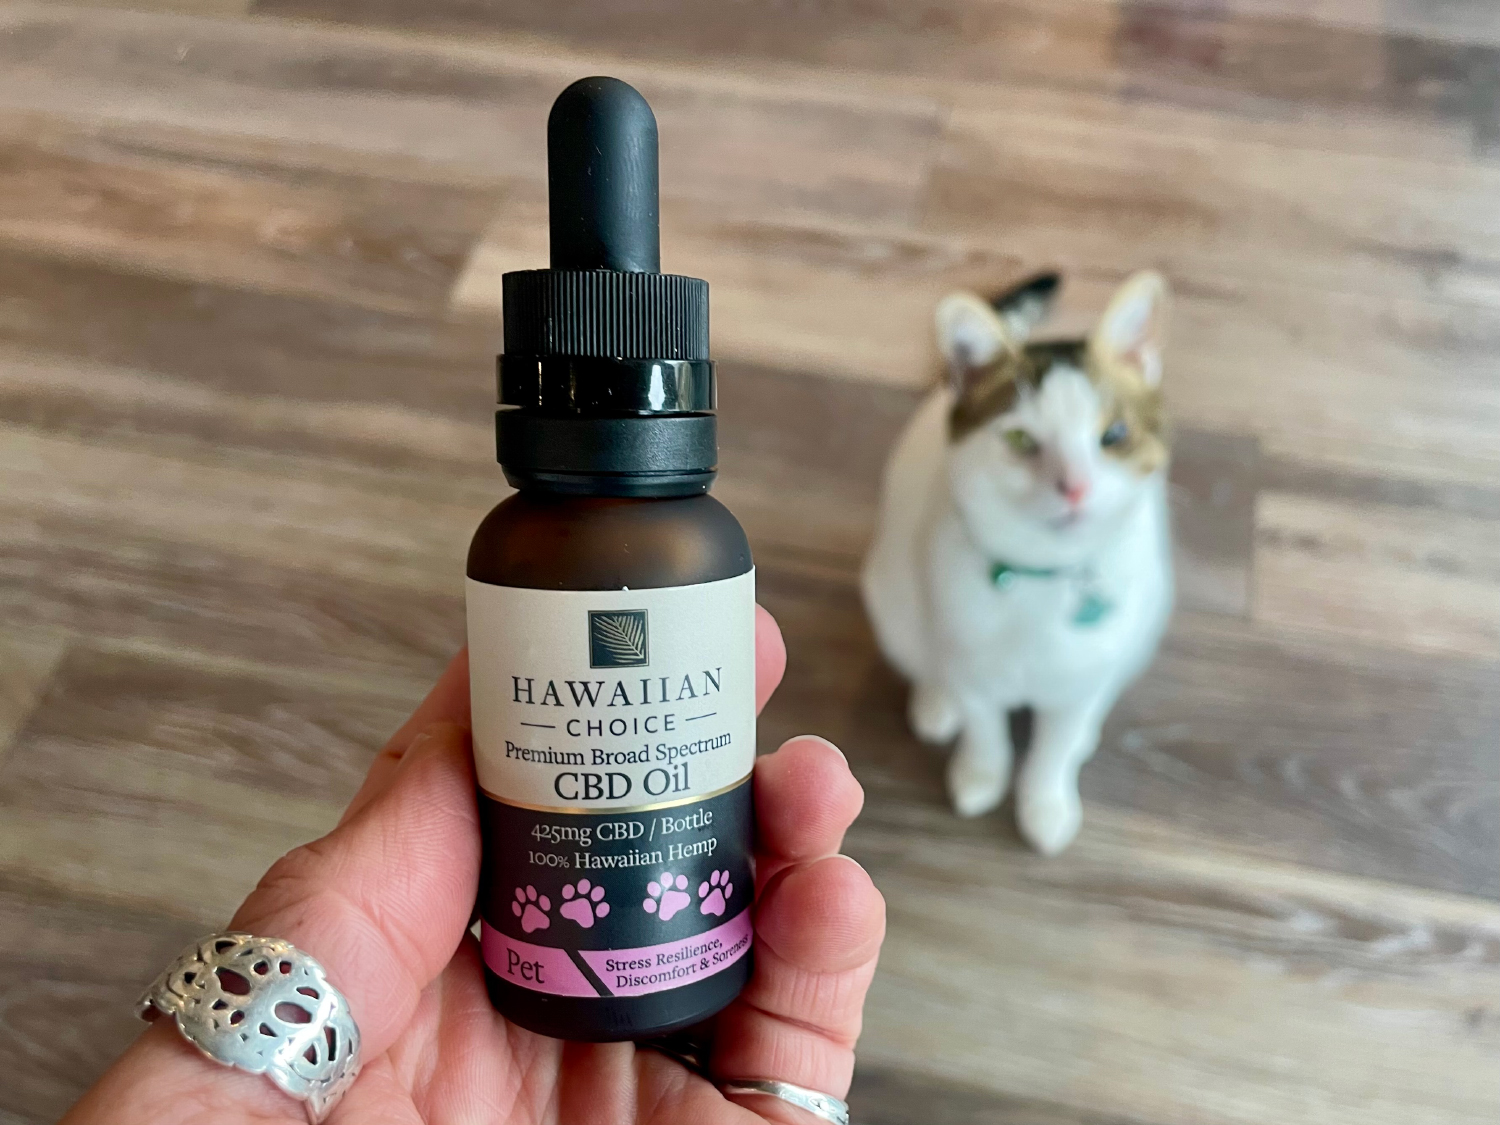 Rare Cannabinoid CBD Cat Oil - product bottle and makoa in the background